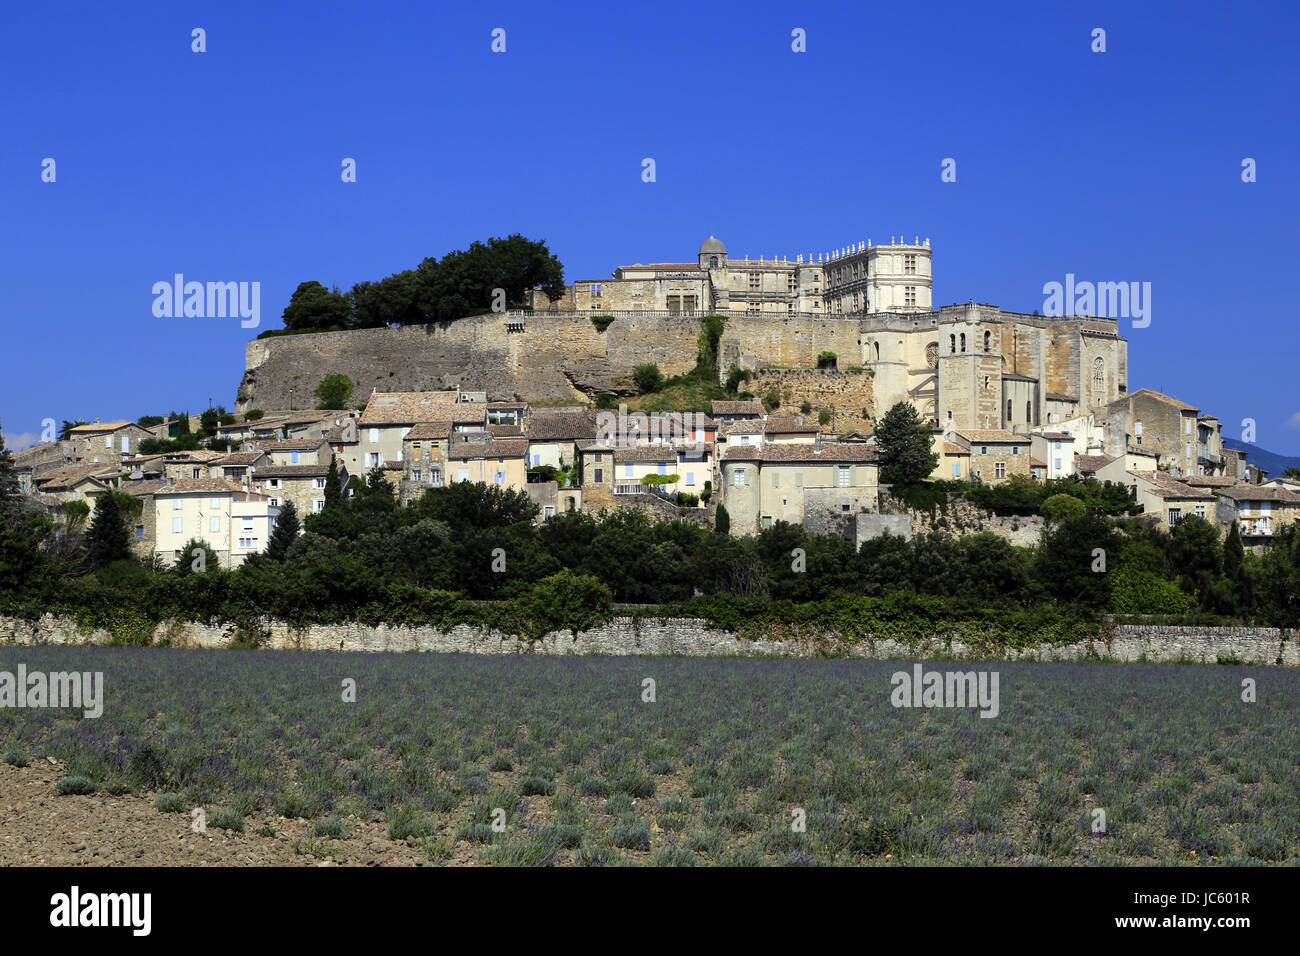 Drome Landscape High Resolution Stock Photography and Images - Alamy